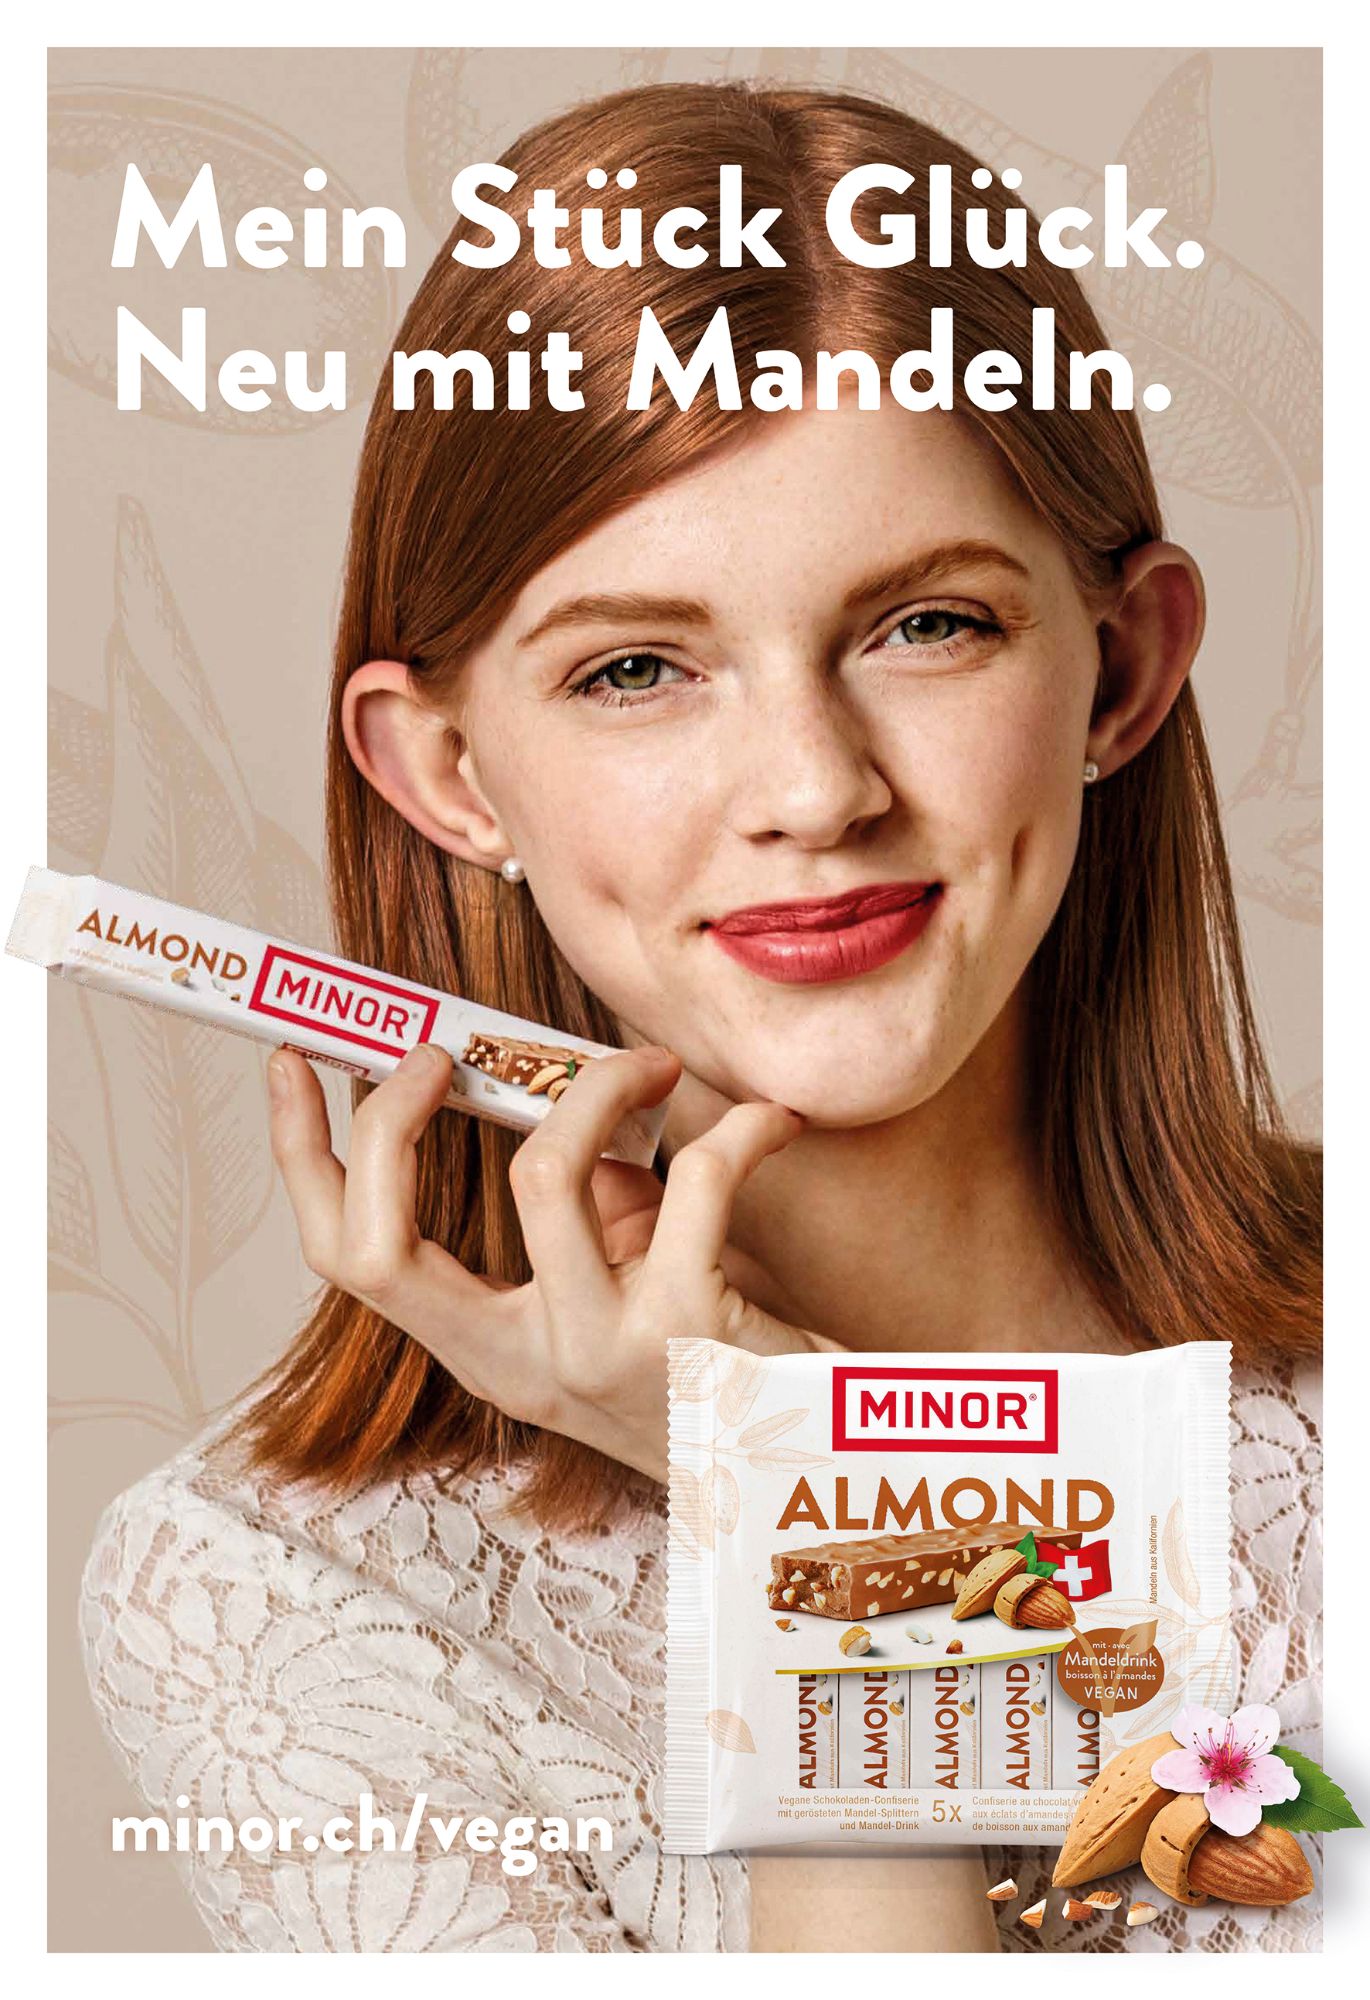 red hair young woman holding a choccolat bar advertising minor almond